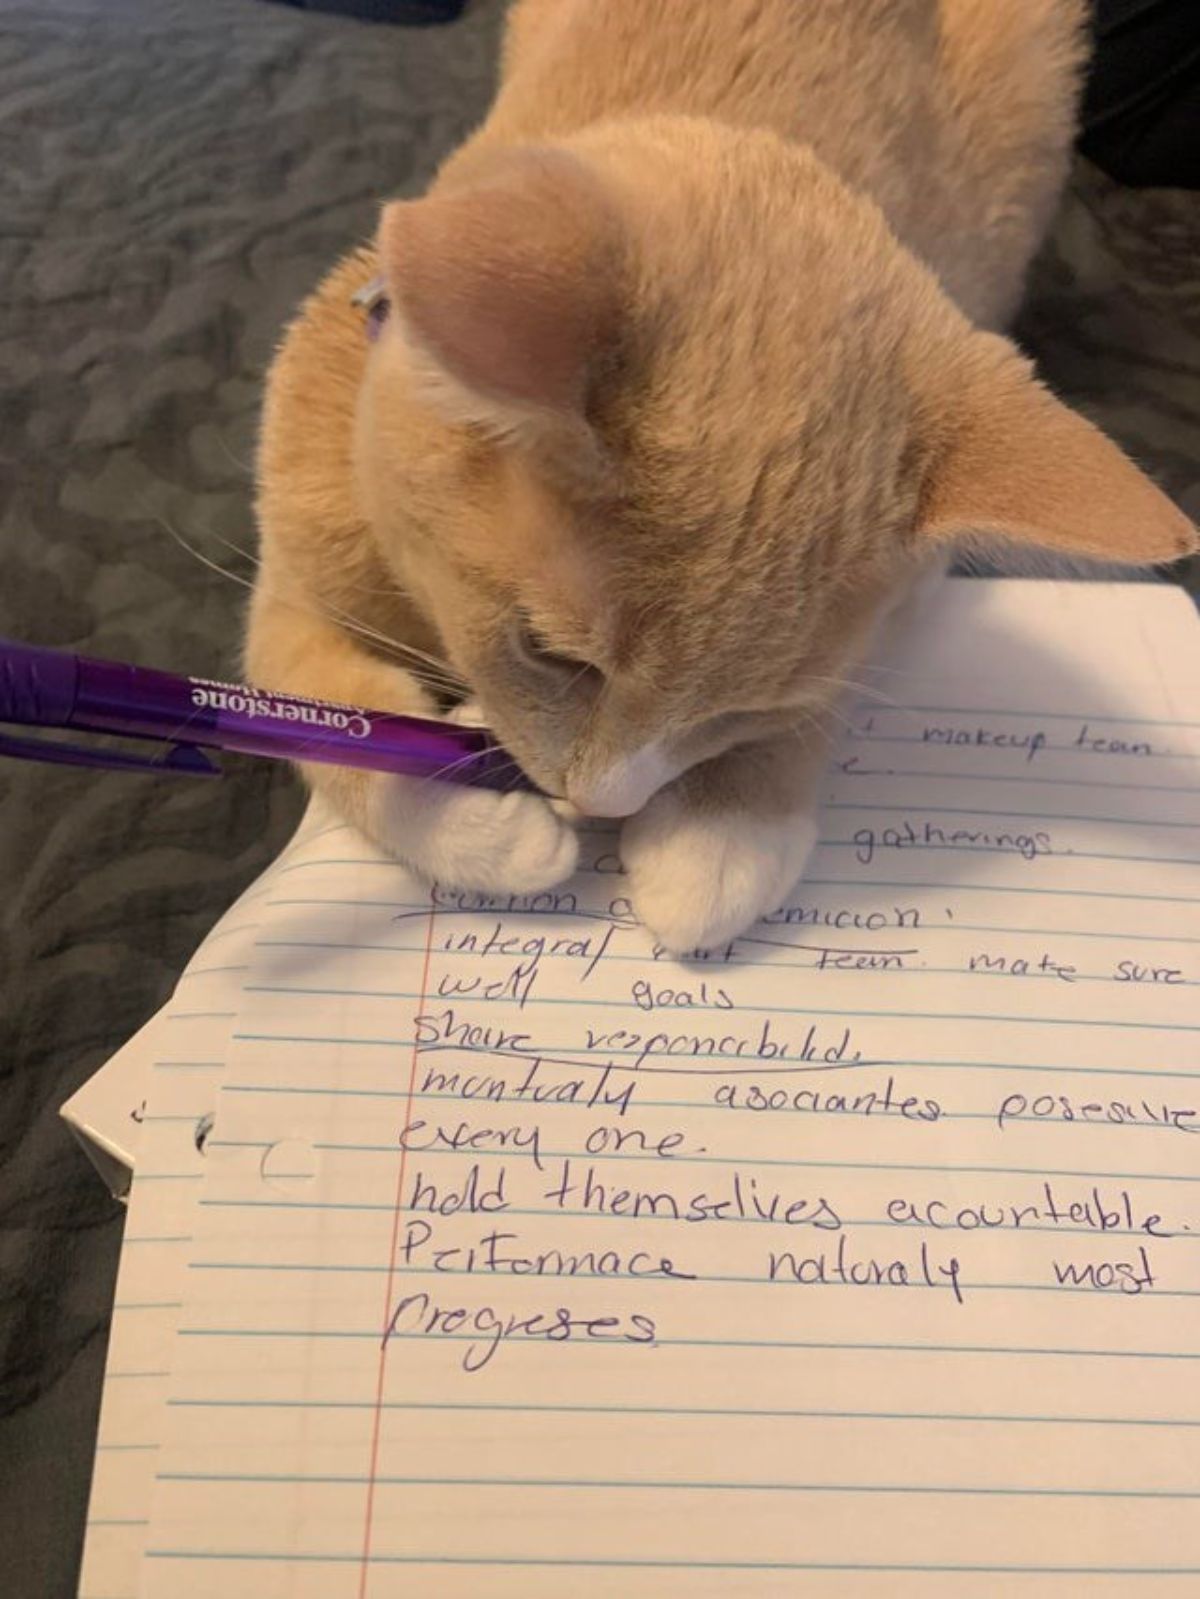 orange and white kitten holding a pen over a paper with text on it